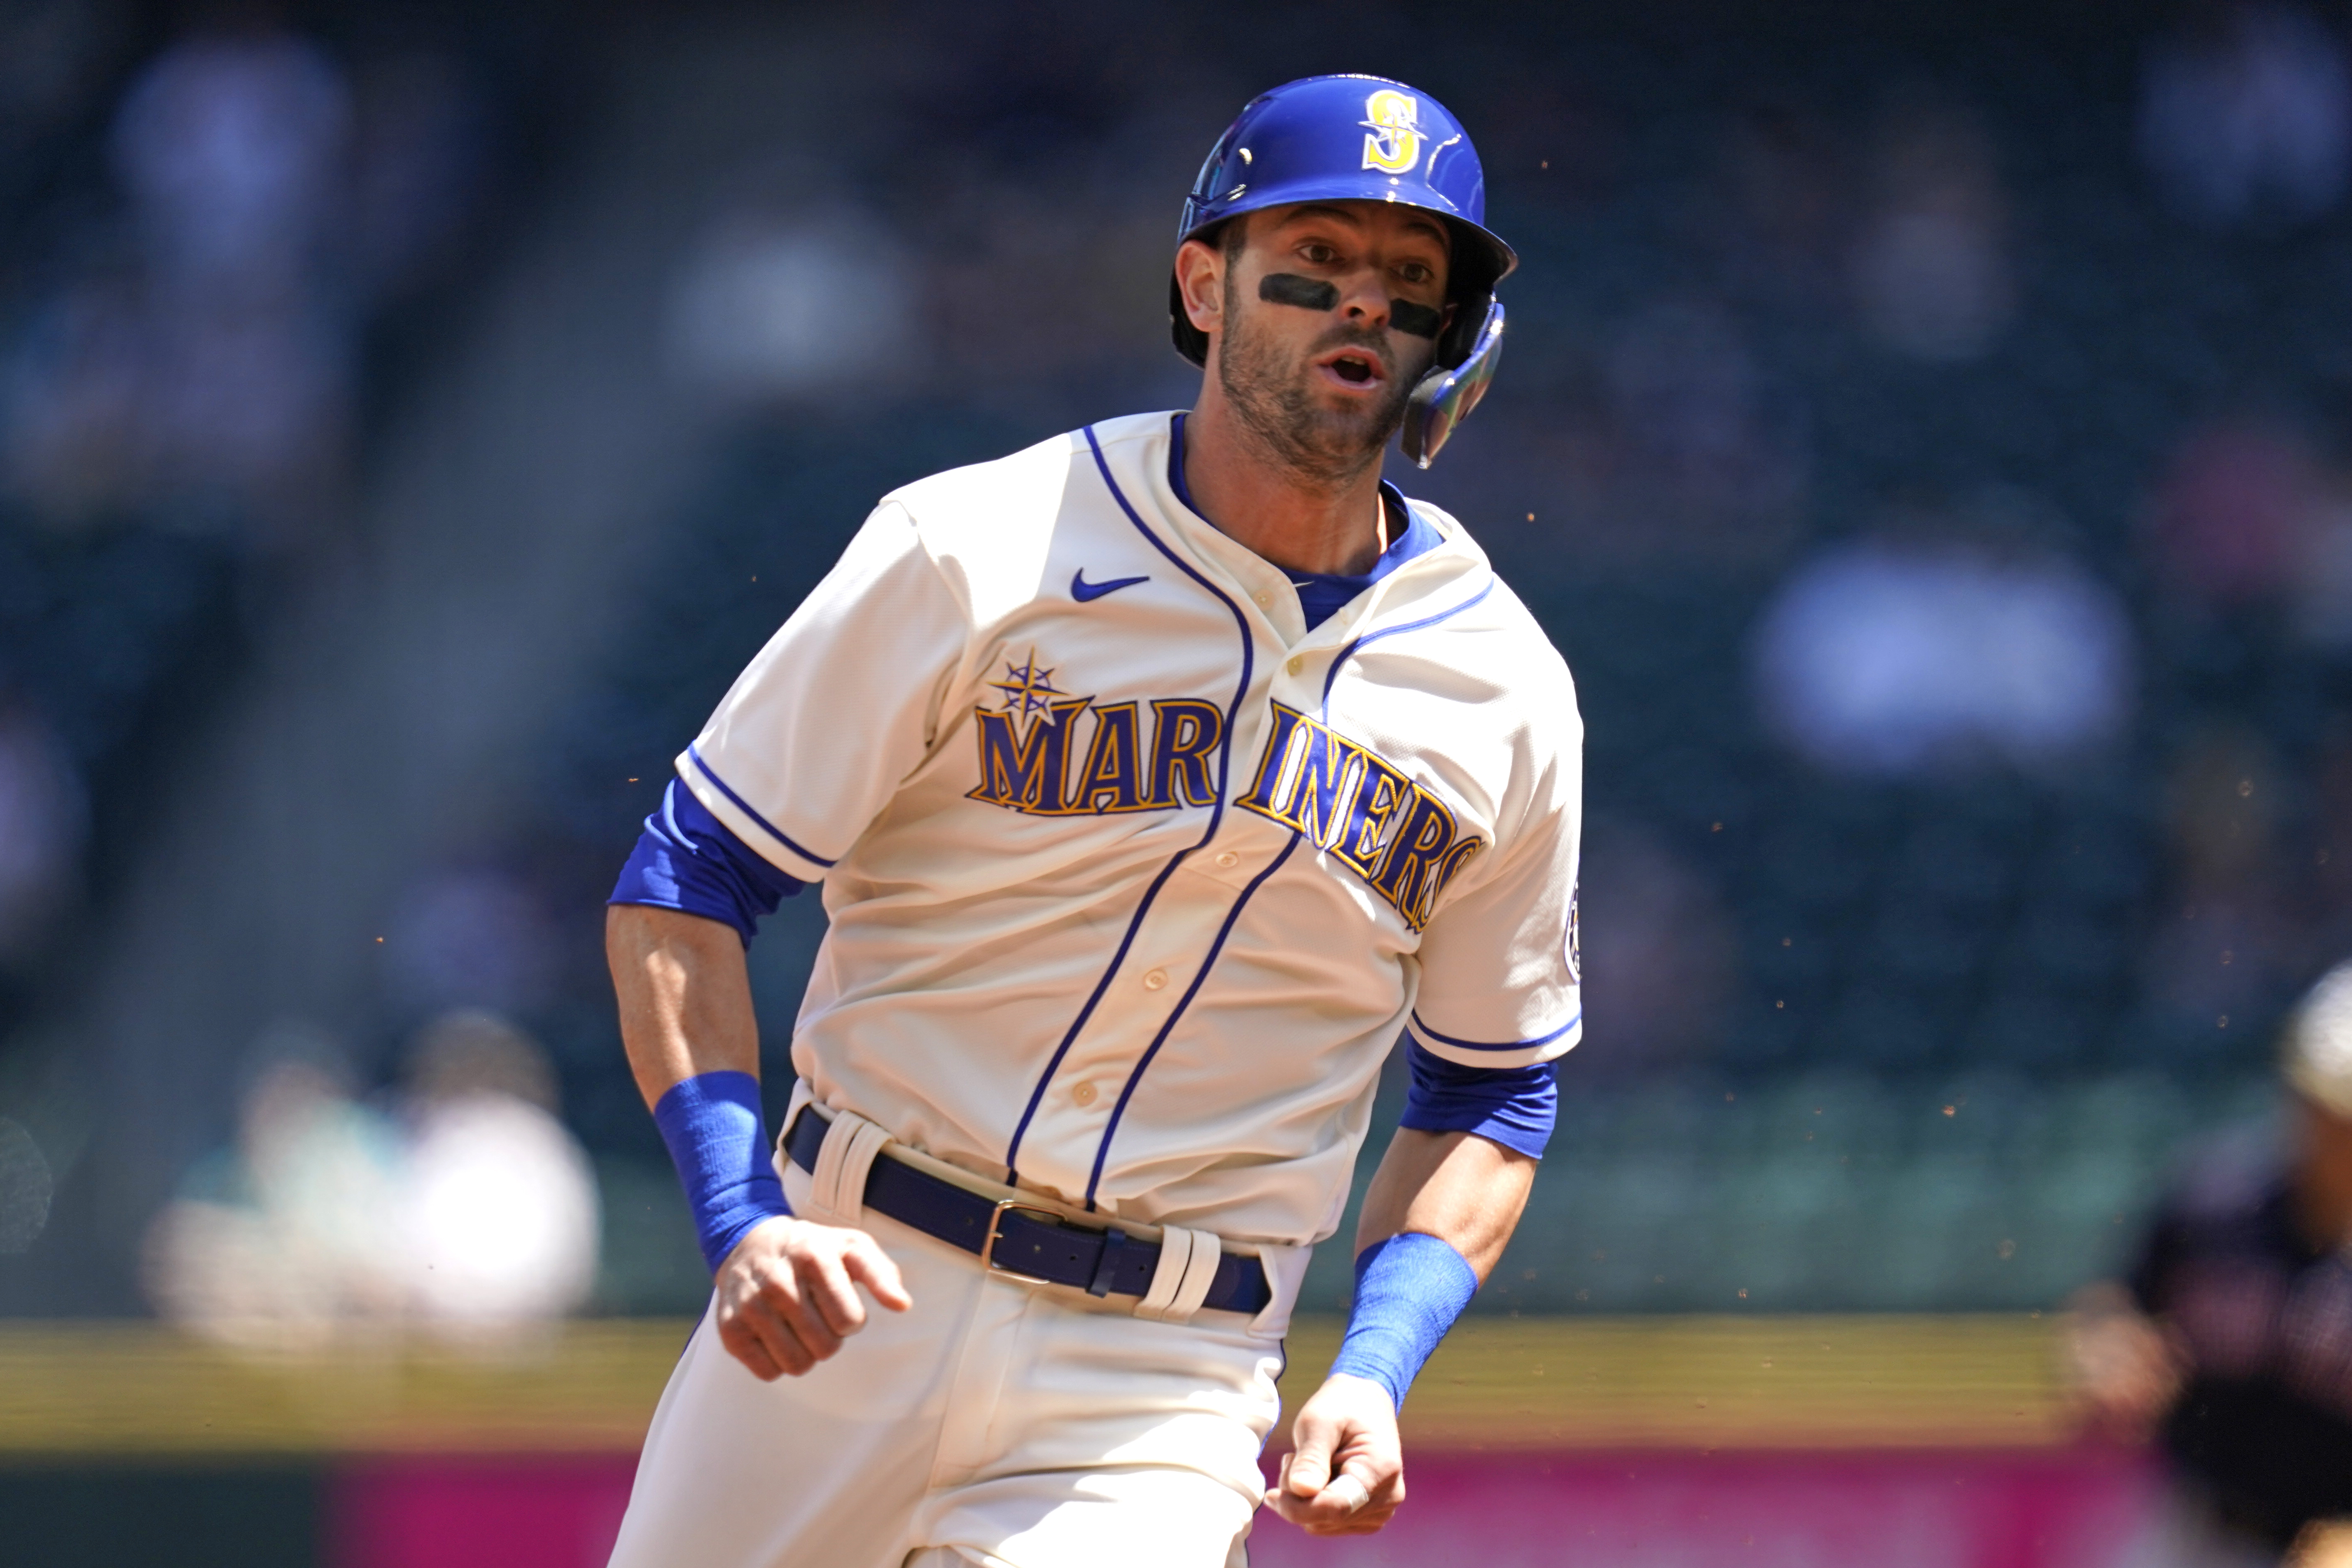 Seattle Mariners outfielder Mitch Haniger (ankle) placed on